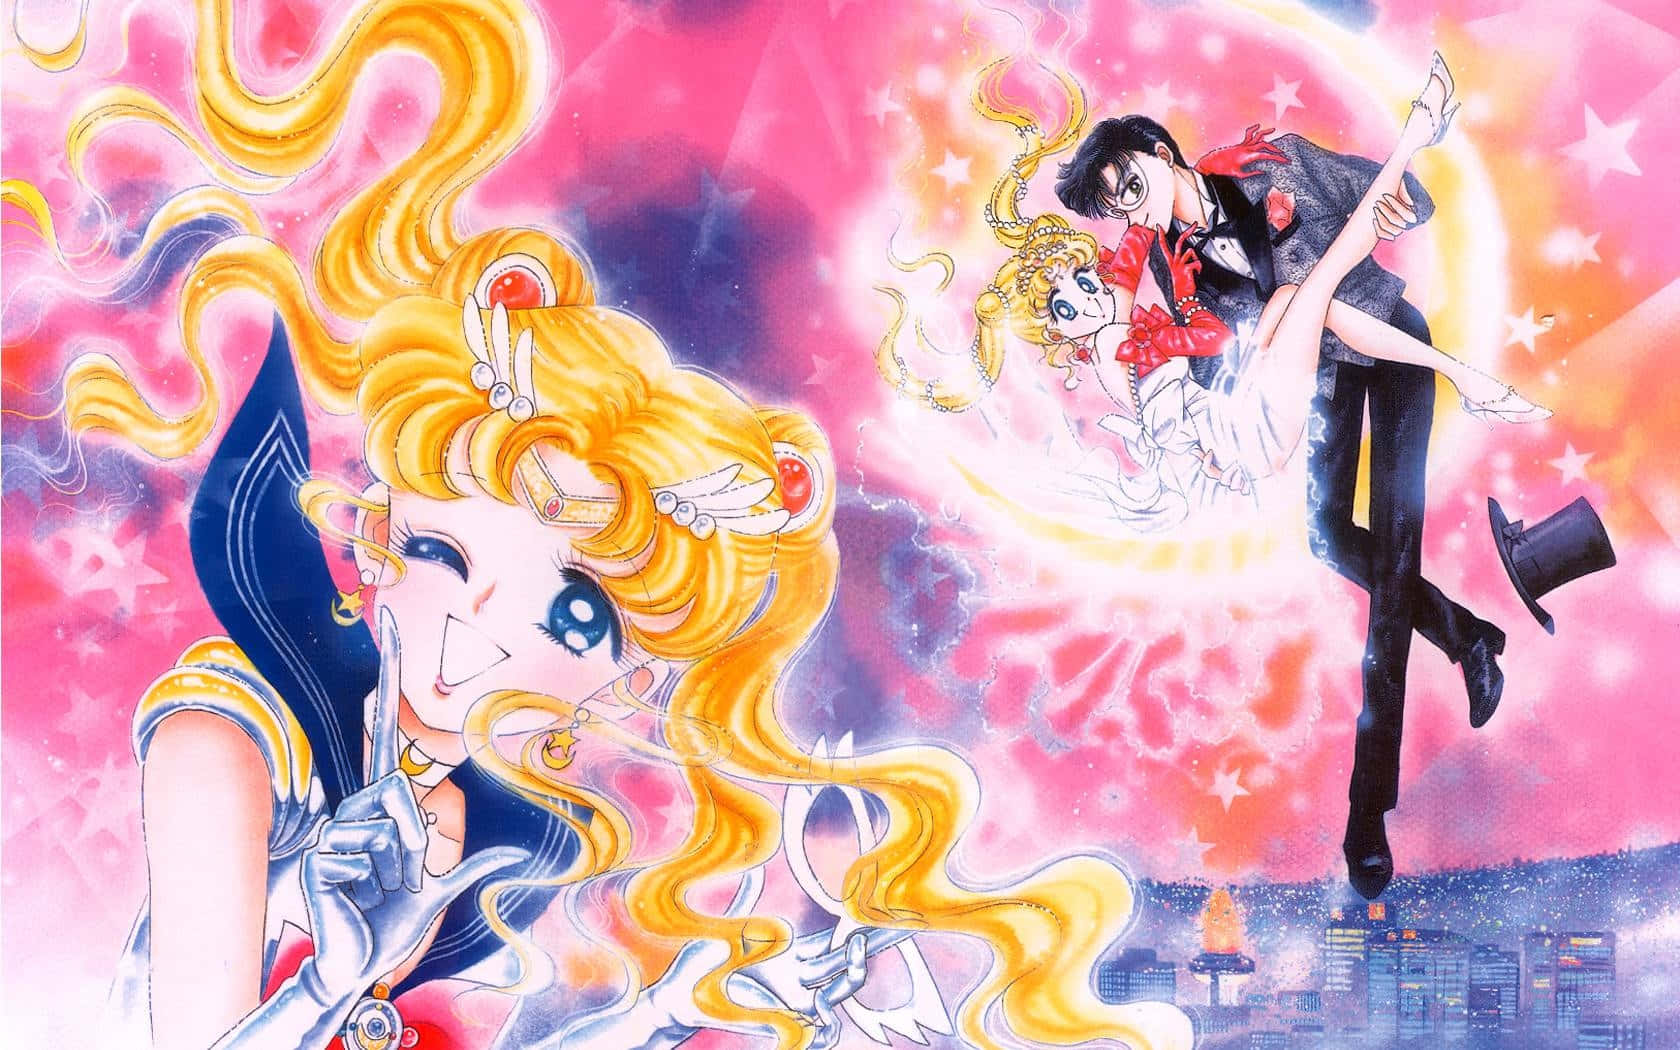 Sailor Moon in all her magical glory!